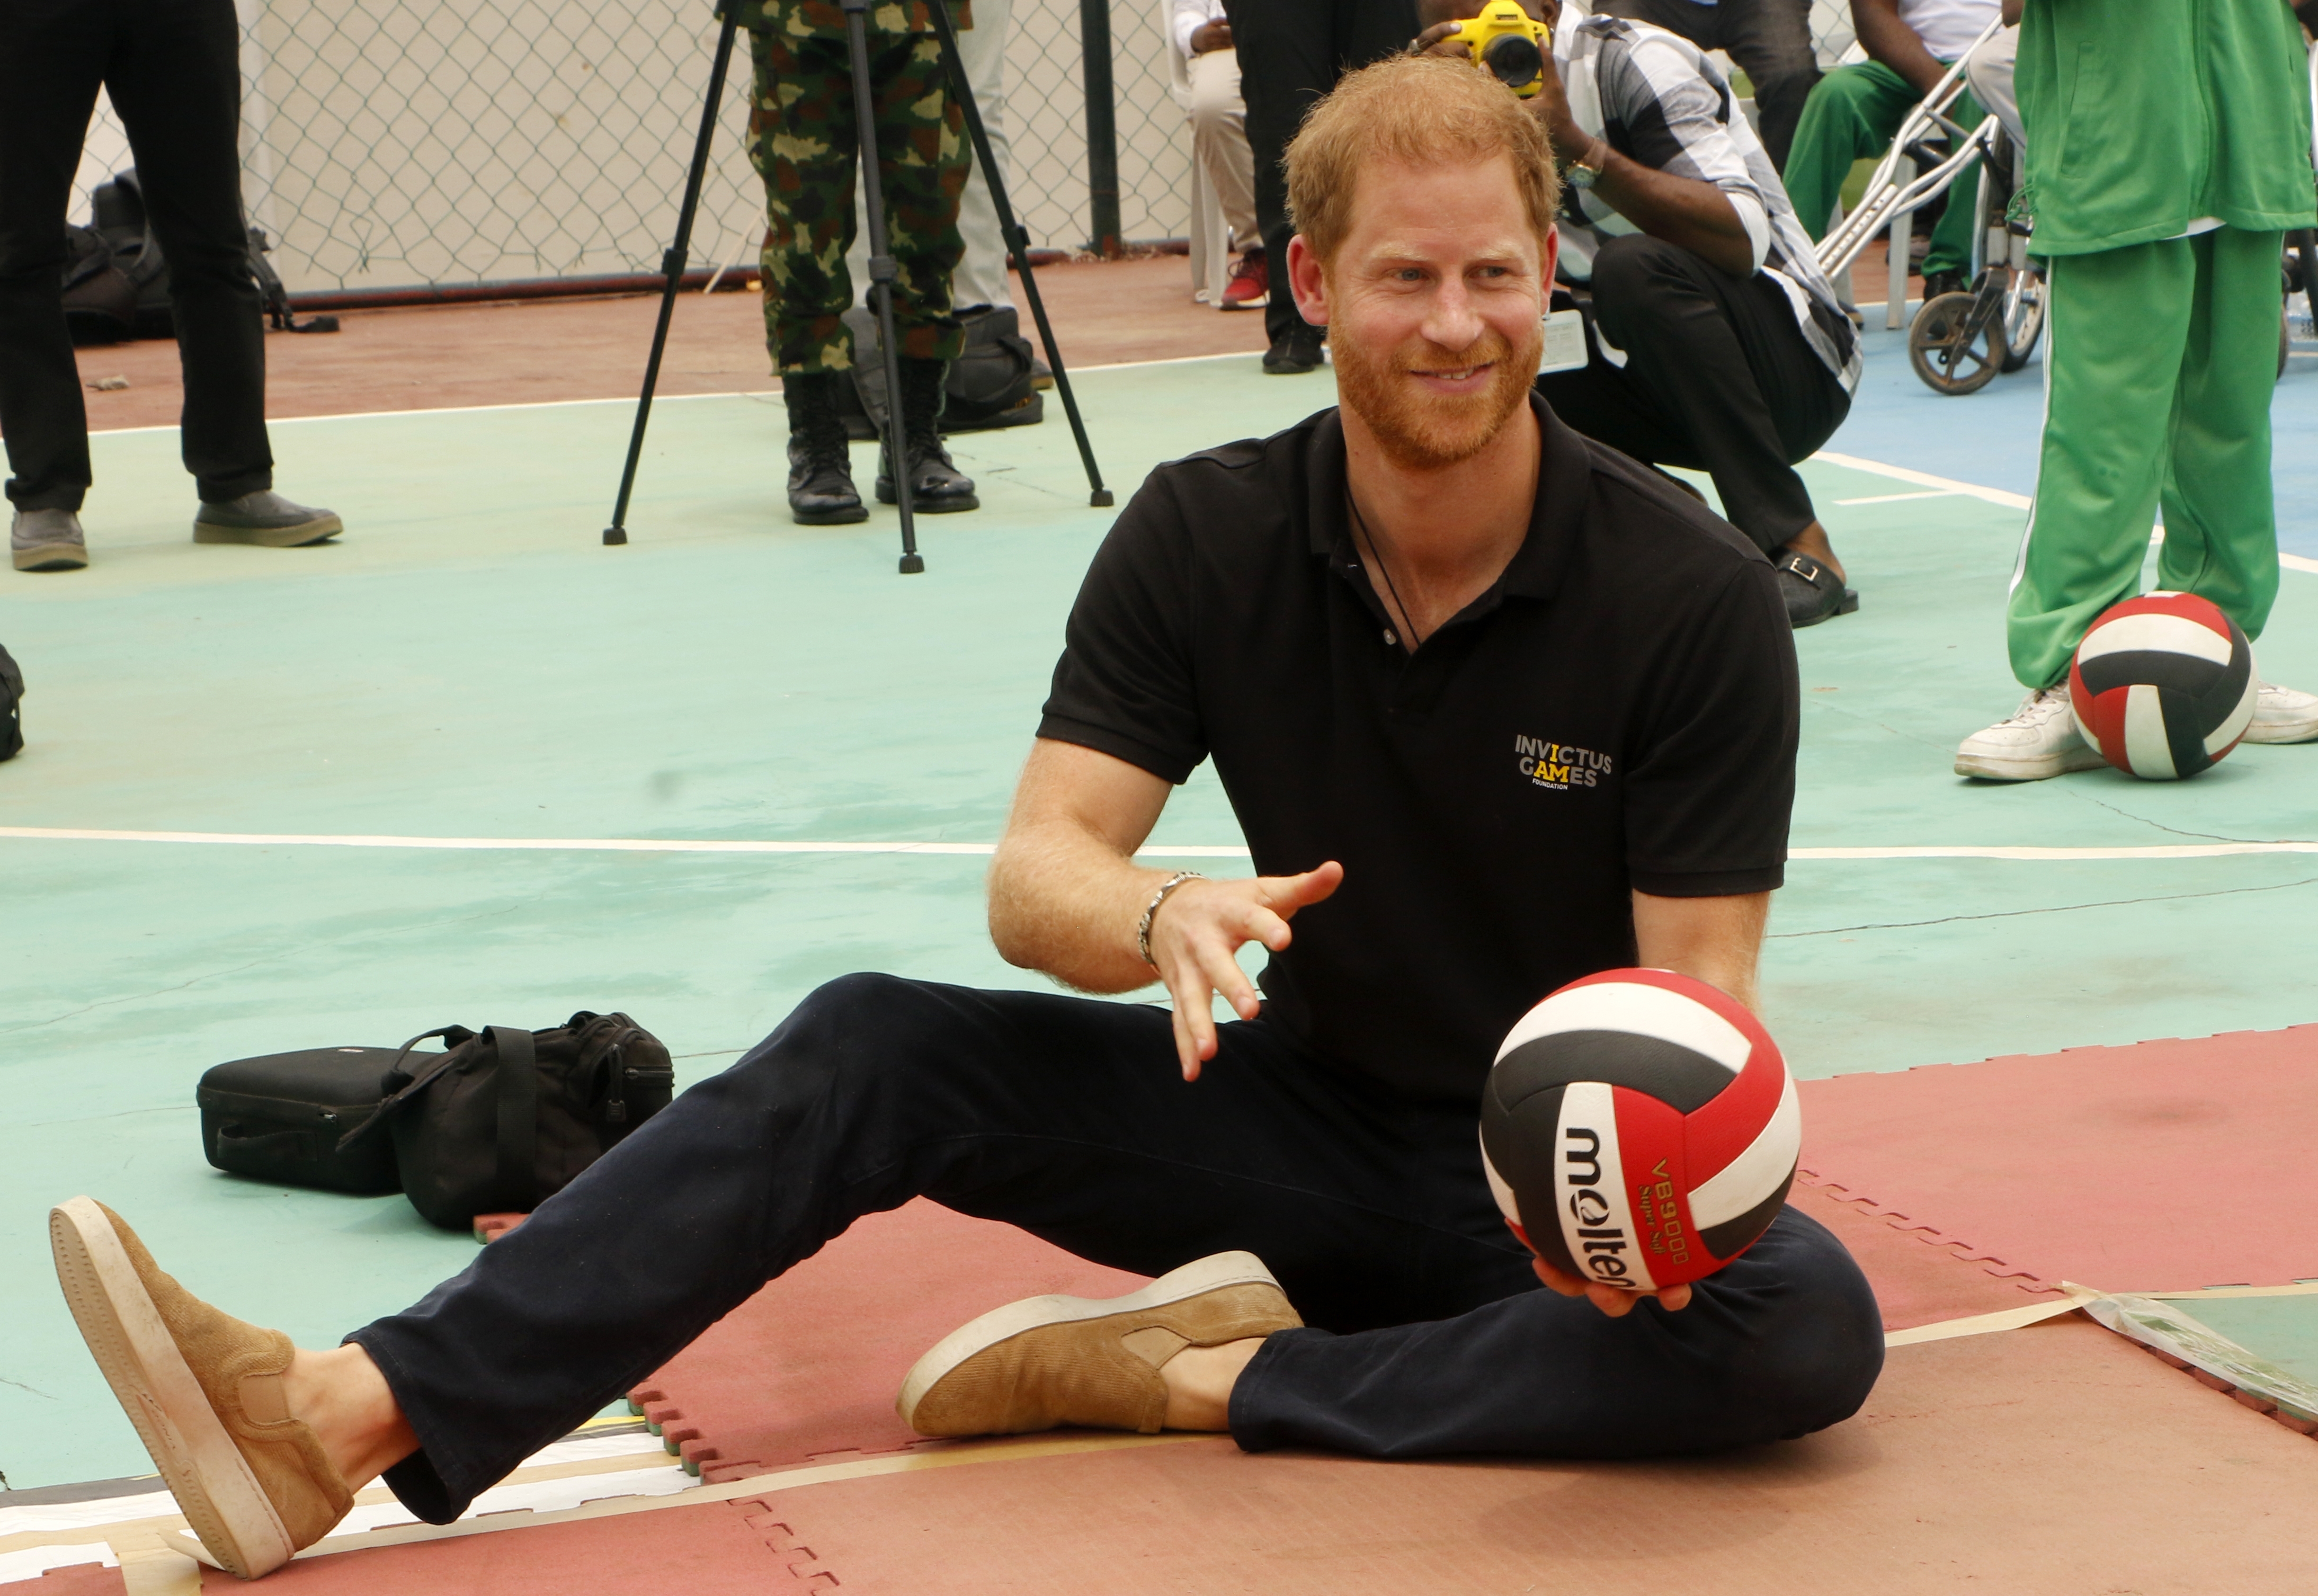 ABUJA, NIREGIA - MAY 11: Britain's Prince Harry, Duke of Sussex, and Britain's Meghan (not seen), Duchess of Sussex, attend an exhibition sitting volleyball match at Nigeria Unconquered, a community-based charitable organization dedicated to aiding wounded, injured, or sick servicemembers, as part of celebrations of Invictus Games anniversary in Abuja, Nigeria on May 11, 2024. (Photo by Emmanuel Osodi/Anadolu via Getty Images)